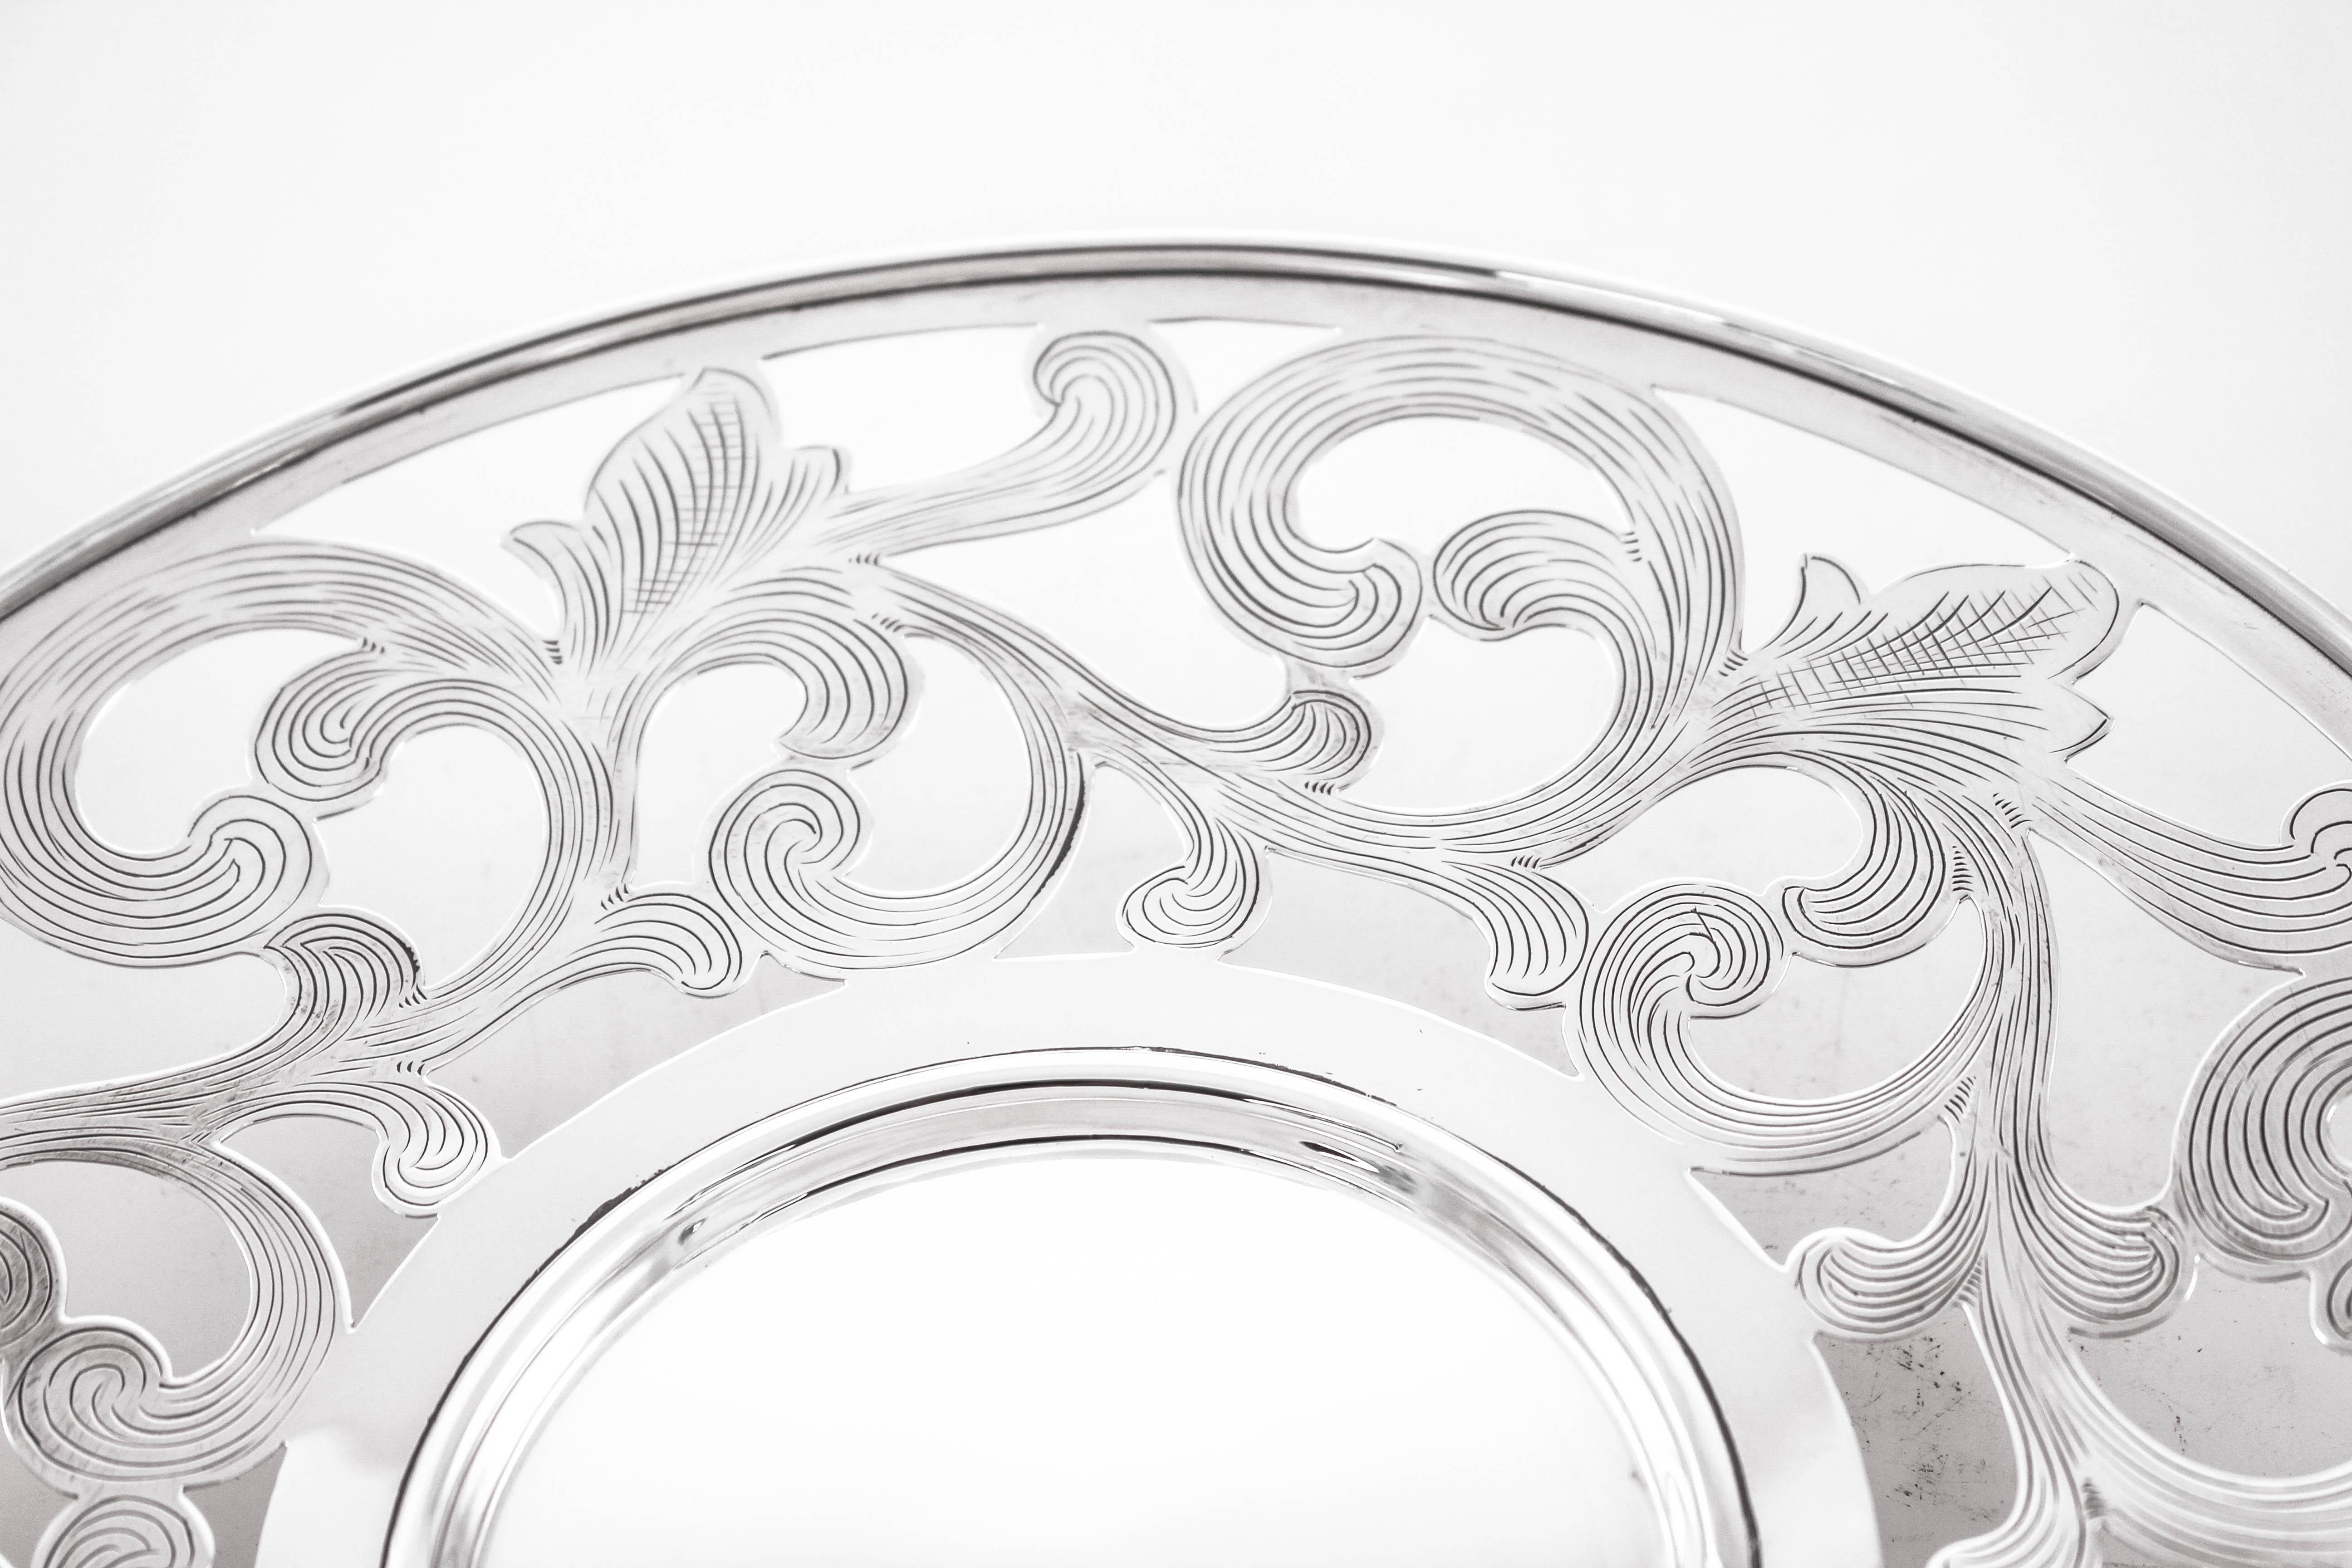 We are proud to offer this sterling silver reticulated dish on a pedestal. The perfect size and shape for casual entertaining. Swirls abound with fine etching on the inside. The pedestal is not weighted and lifts the dish off the surface.